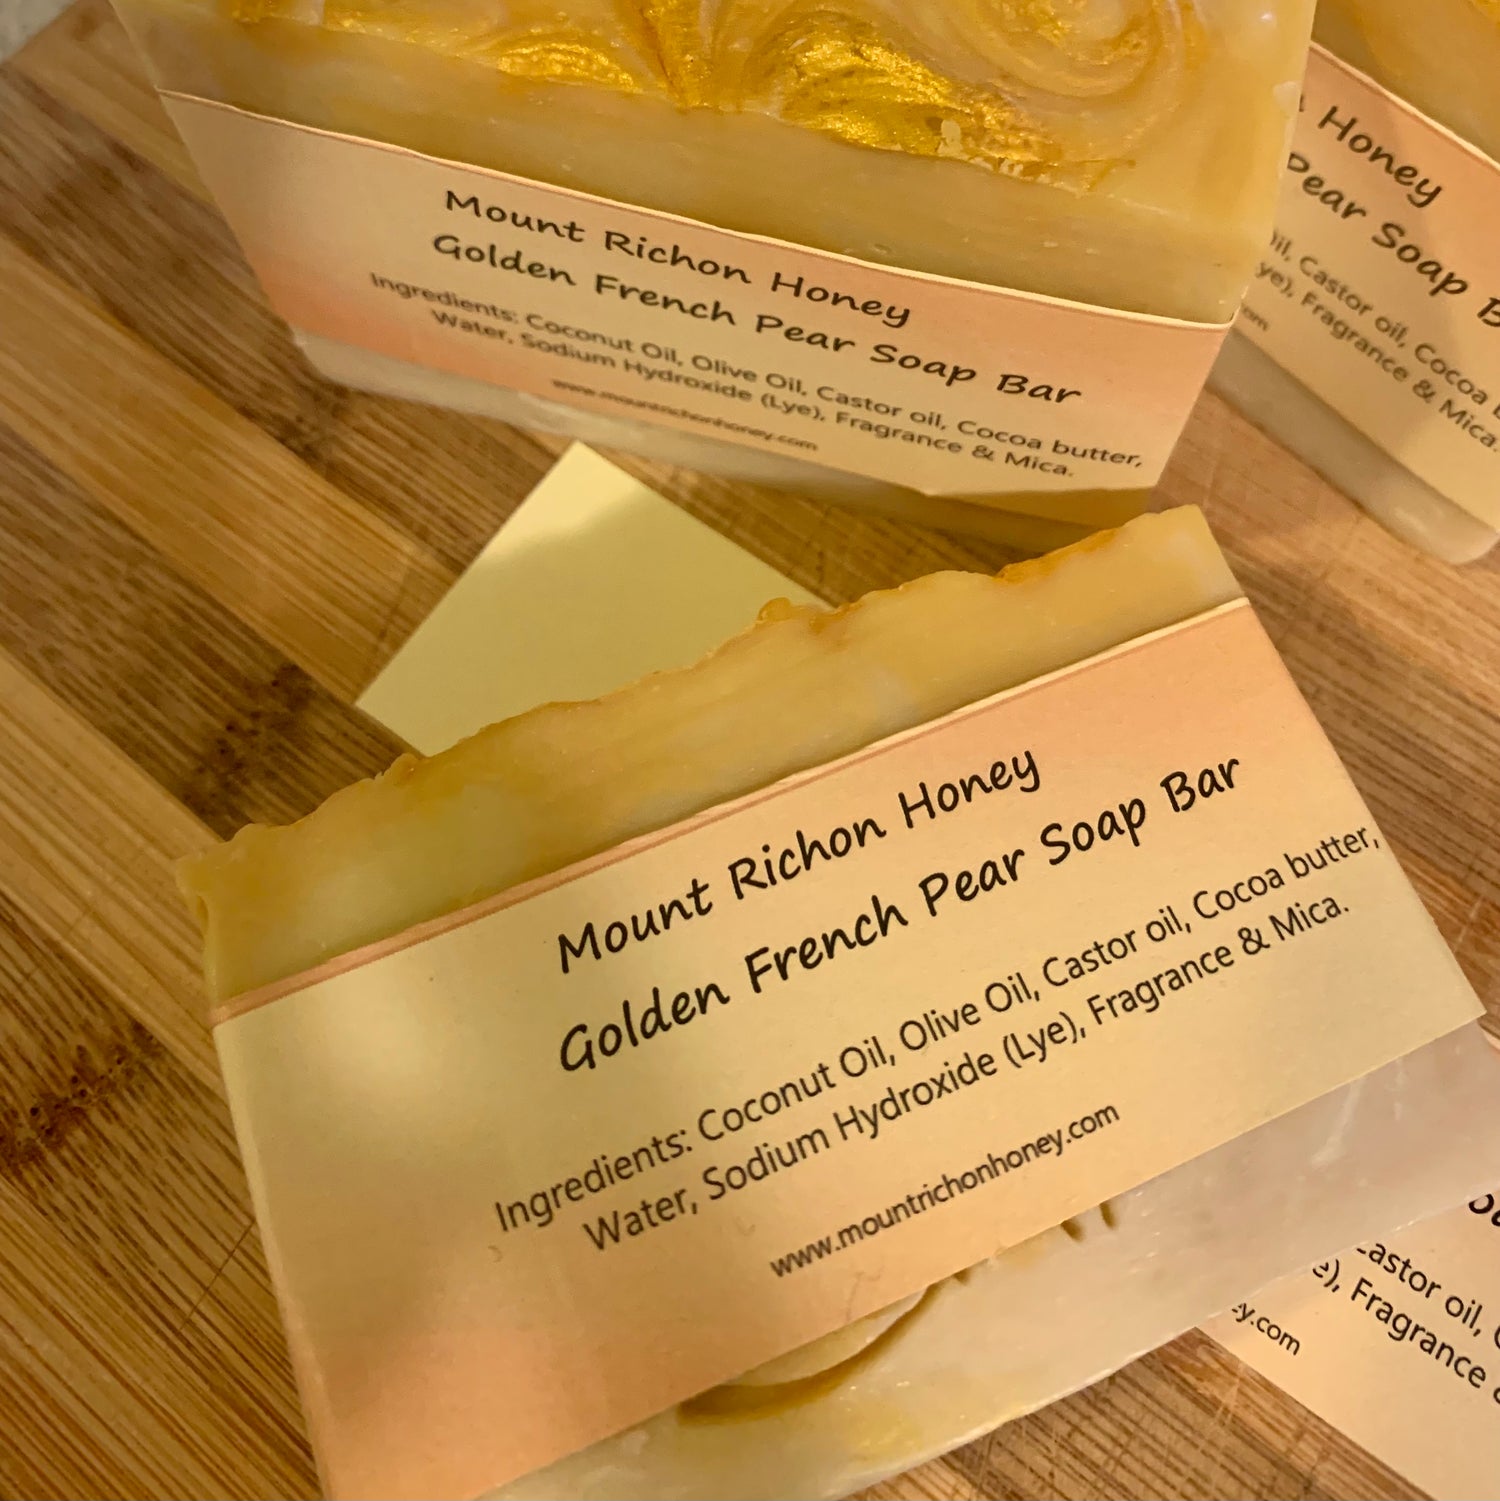 Golden French Pear Soap